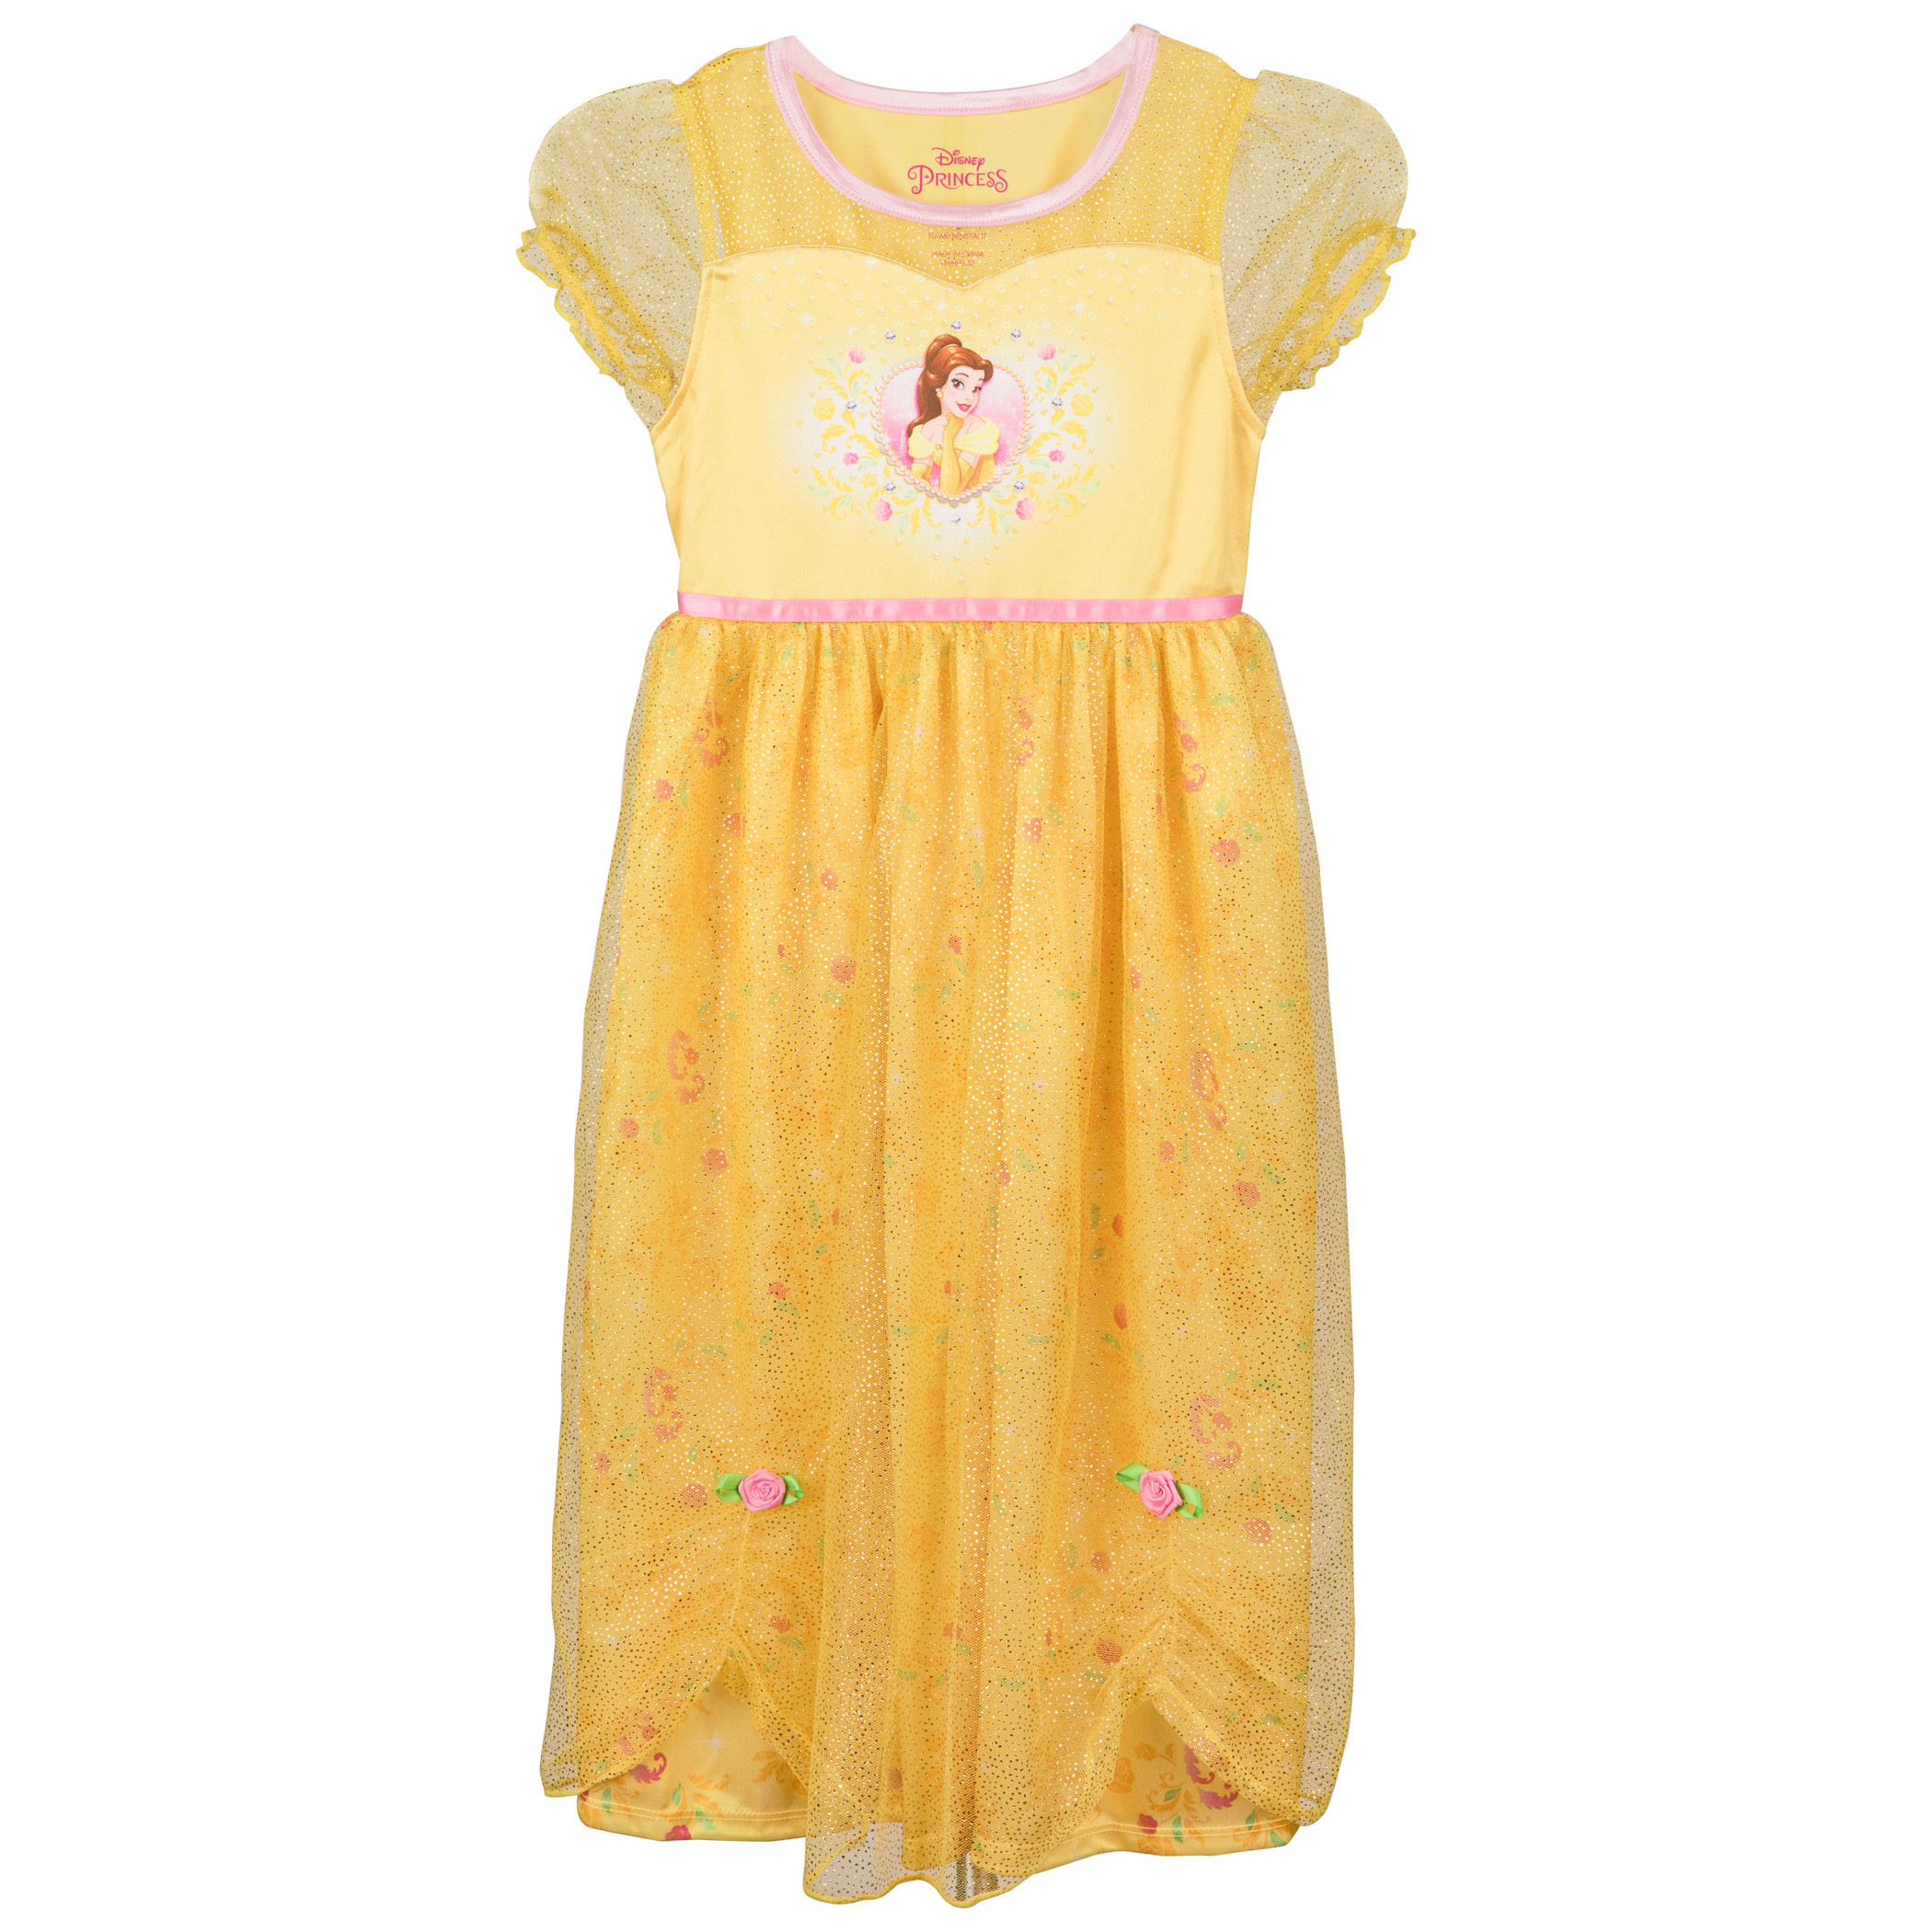 The Beauty and The Beast Belle Girl's Fantasy Gown Pajamas